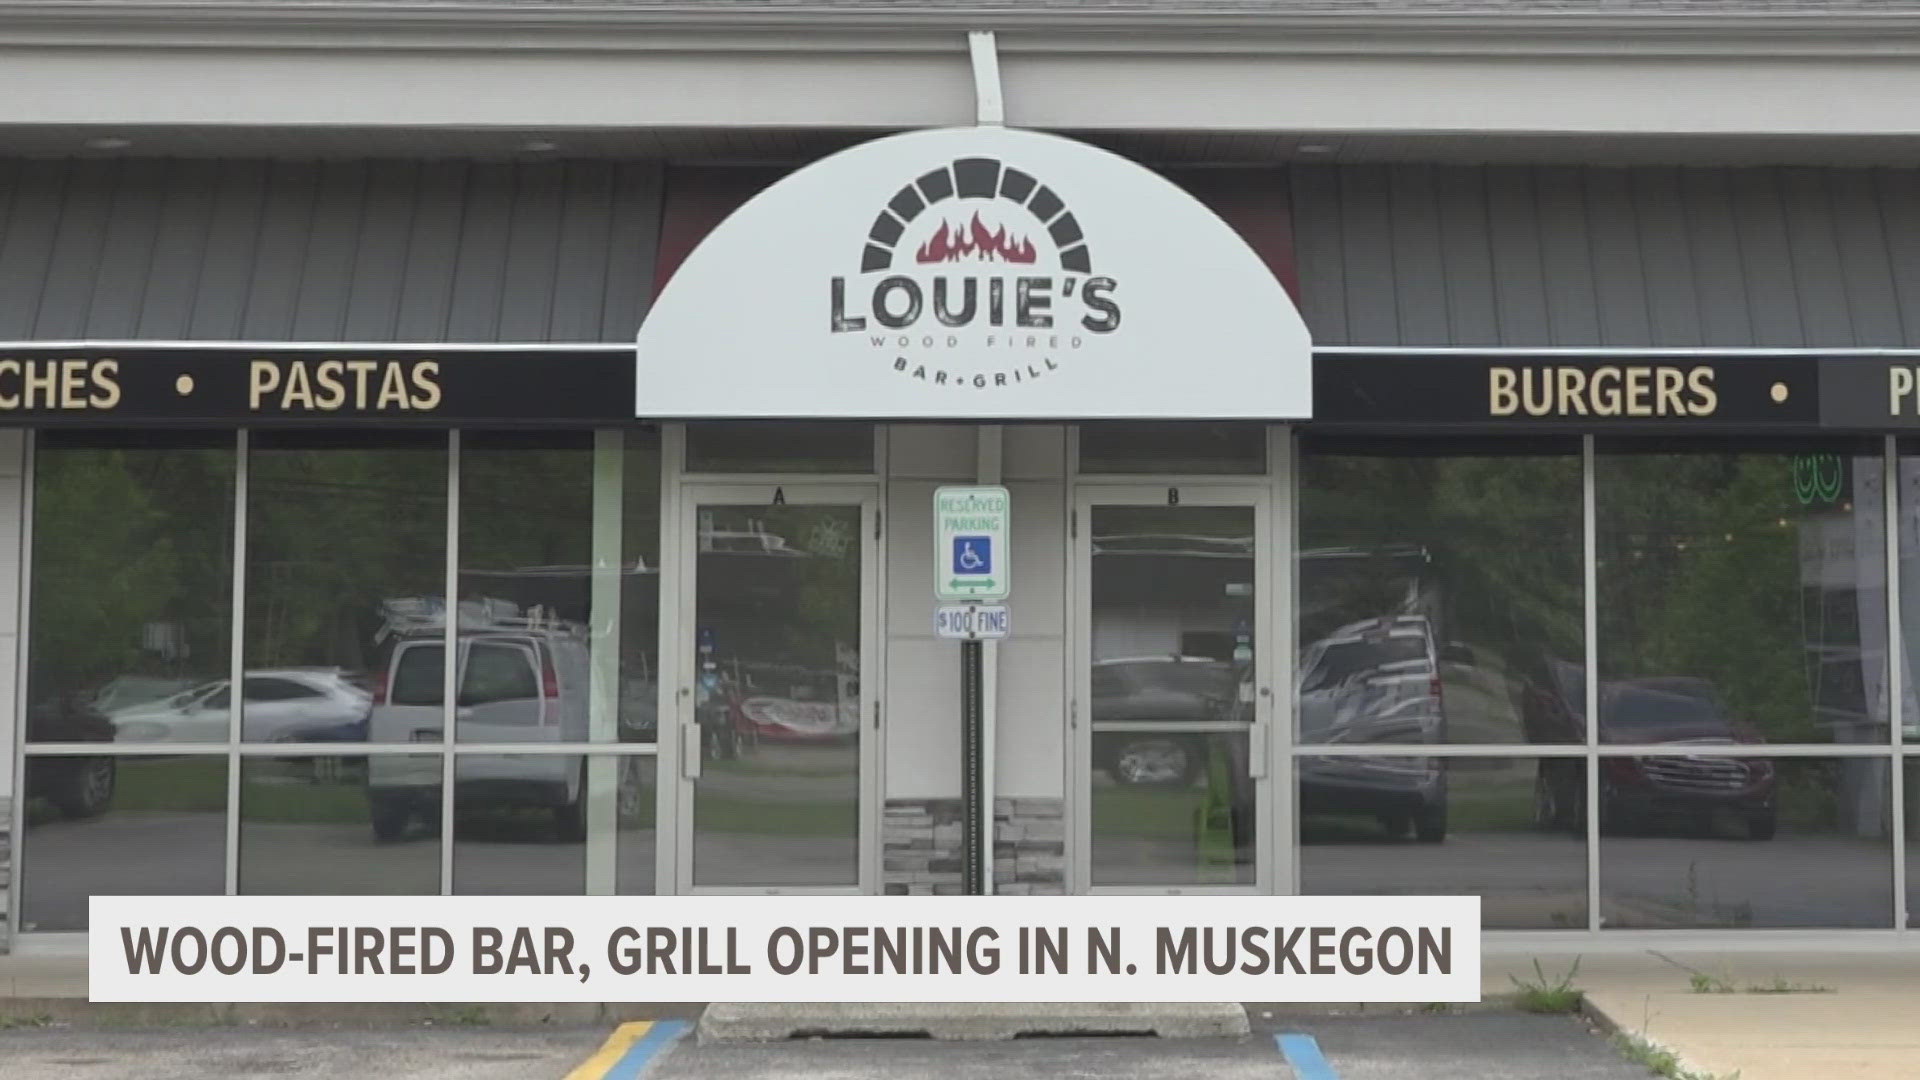 Louie's Wood-fired Bar and Grill will be dishing out pizza, shared plates and craft cocktails.